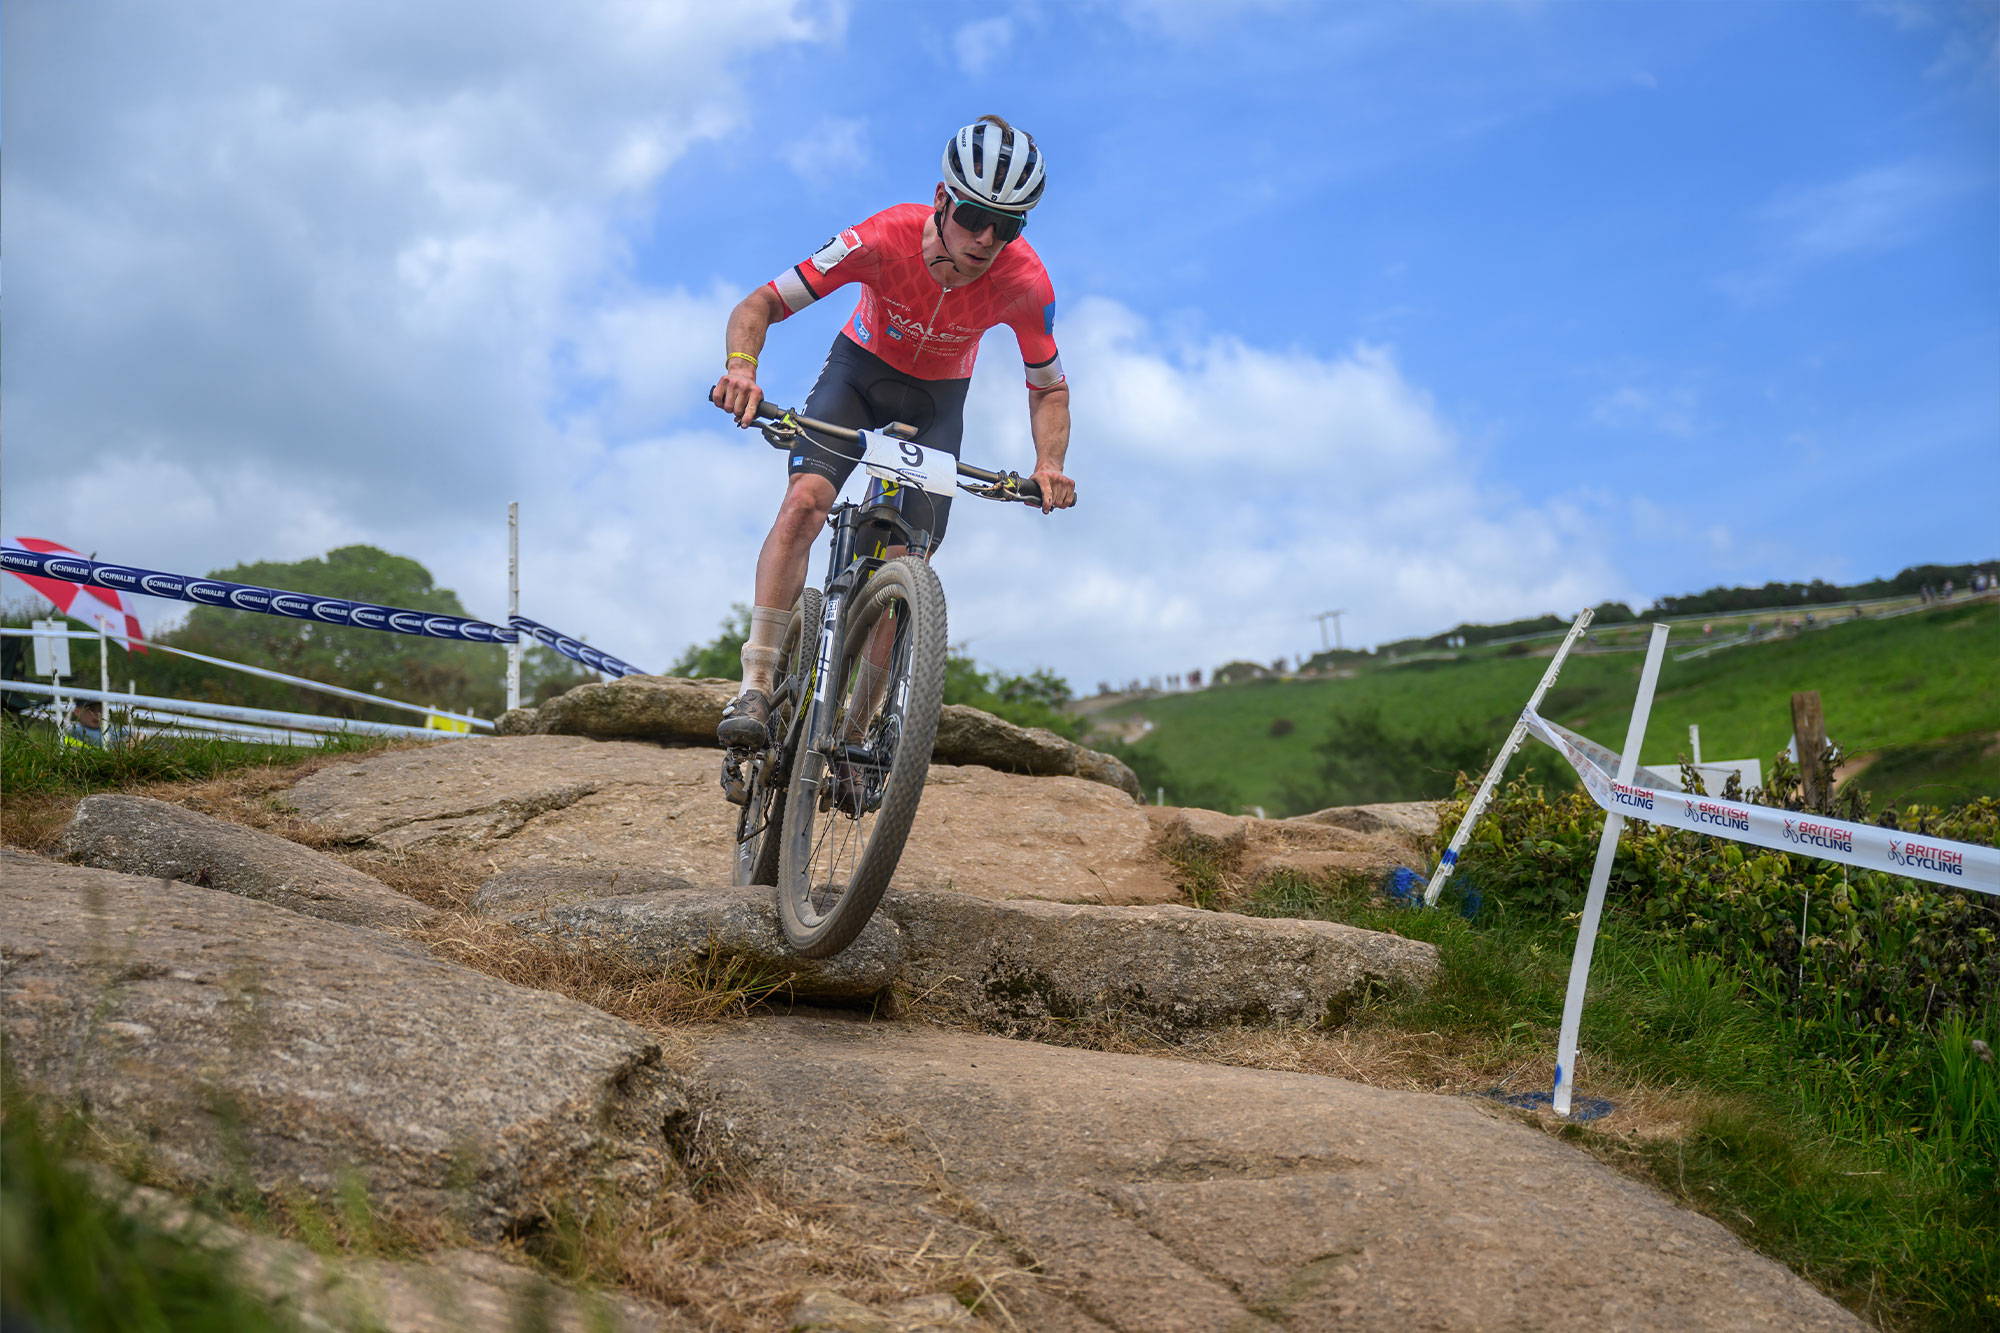 Huw riding over rocky section at XC race